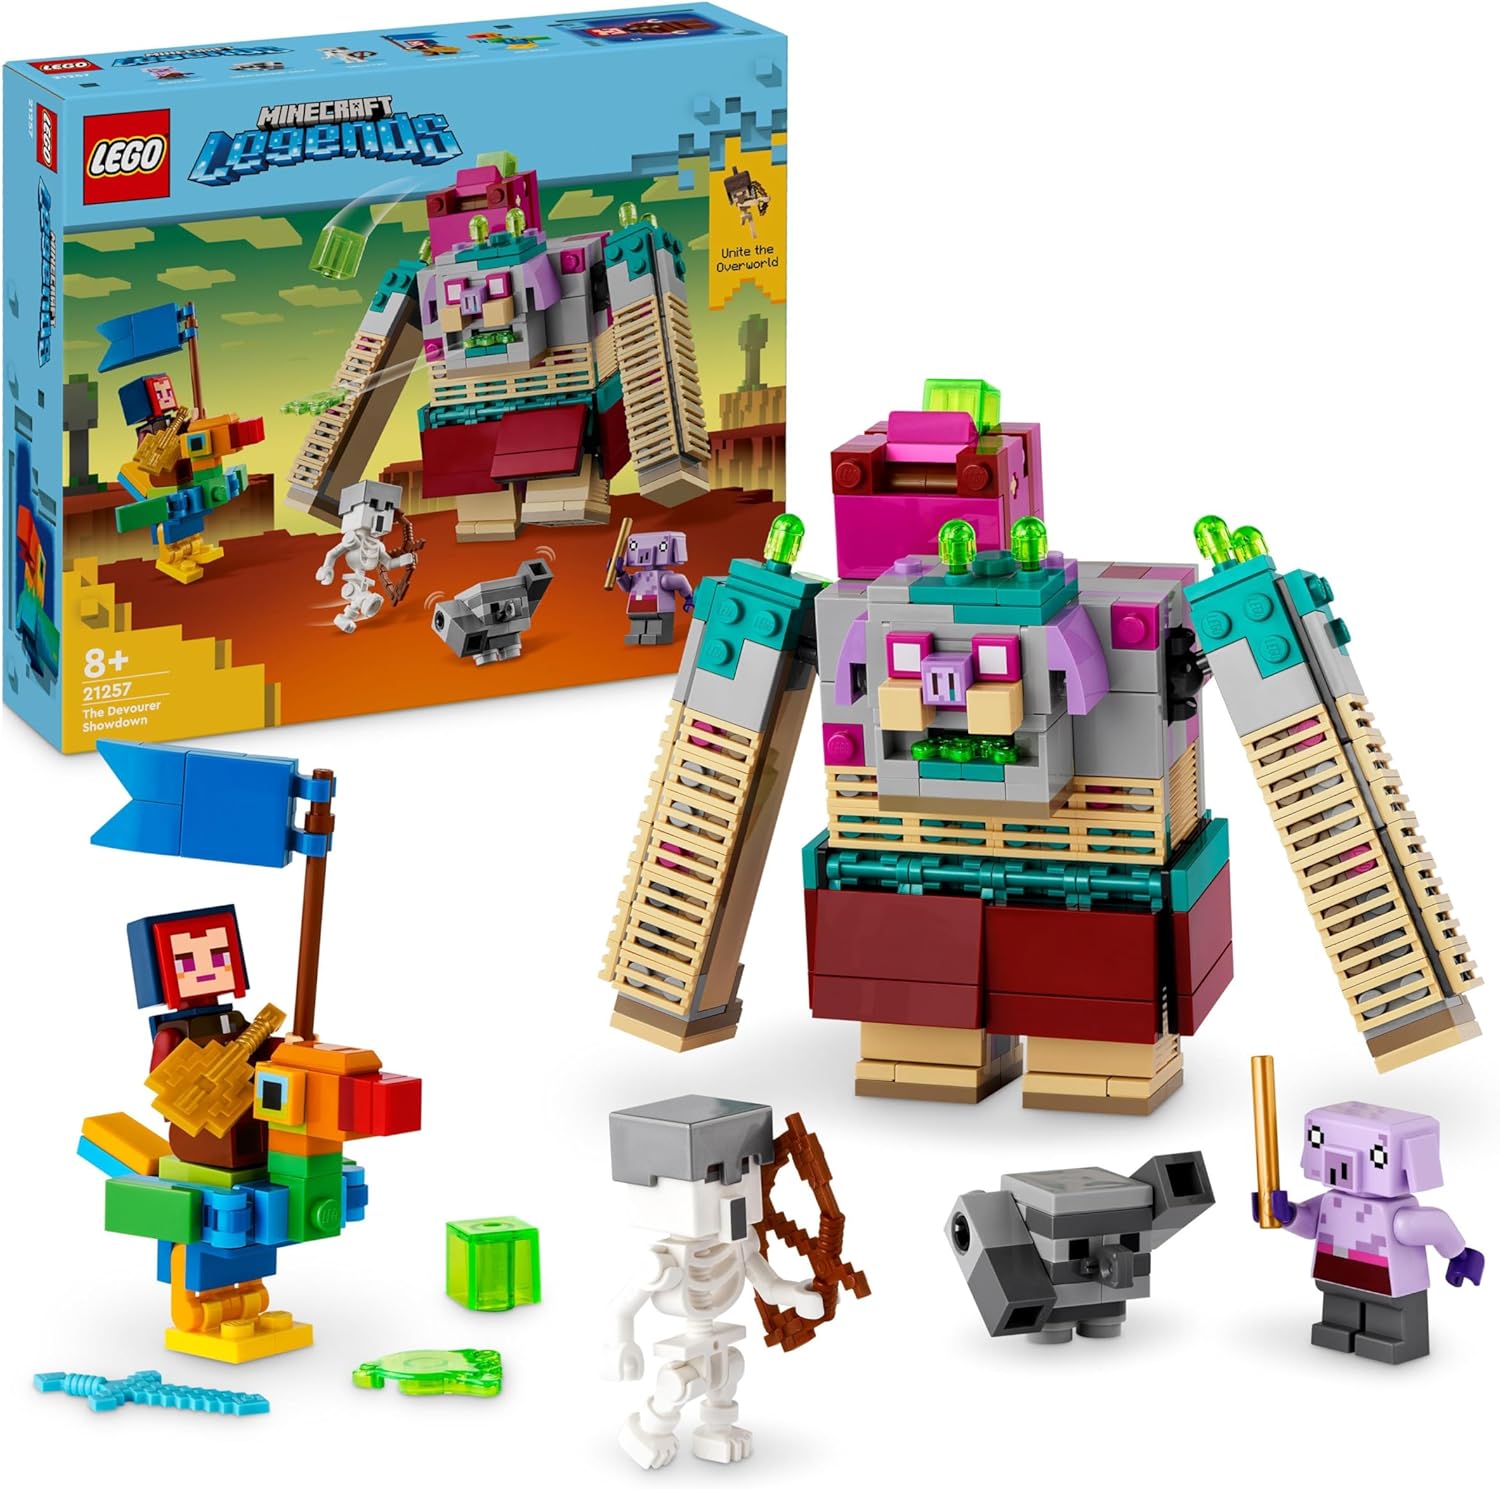 LEGO Minecraft Legends Showdown with the Devourer, Action Toy with Popular Figures, Toy for Children, Gift for Boys, Girls and All Gamers from 8 Years 21257